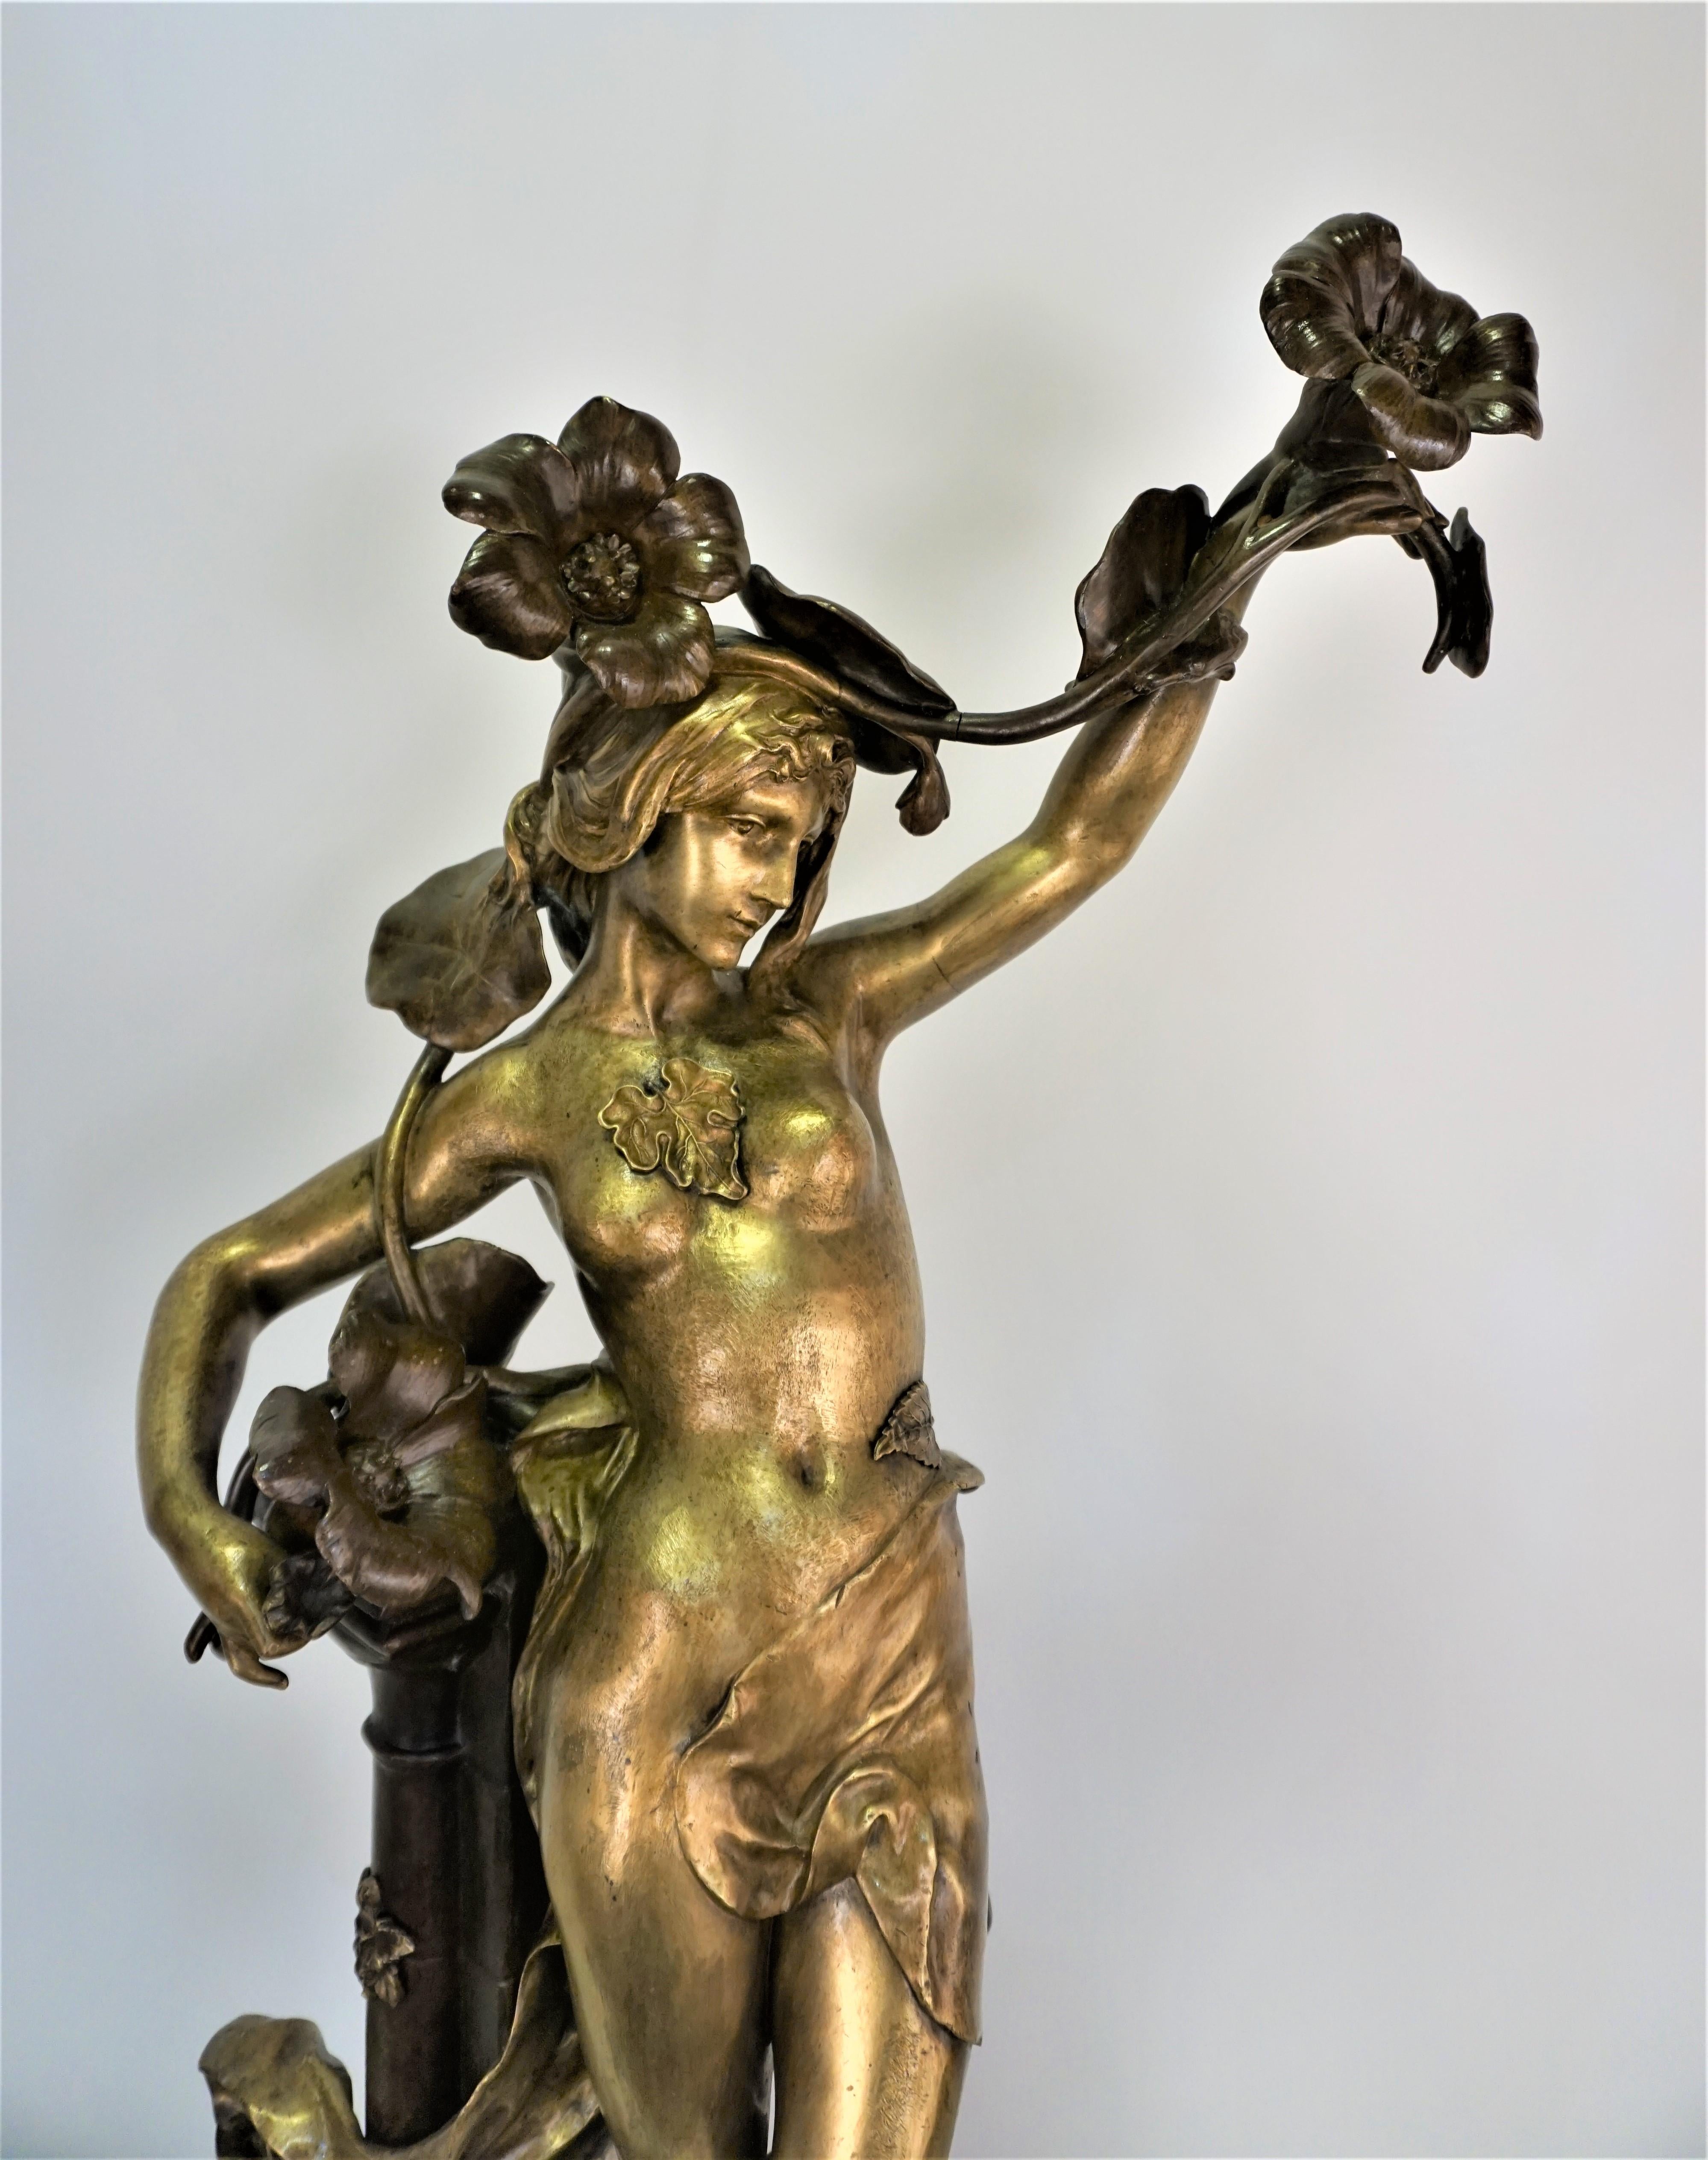 Art Nouveau nude bronze sculpture, circa 1890 has been finished in textured golden and brown- black color.